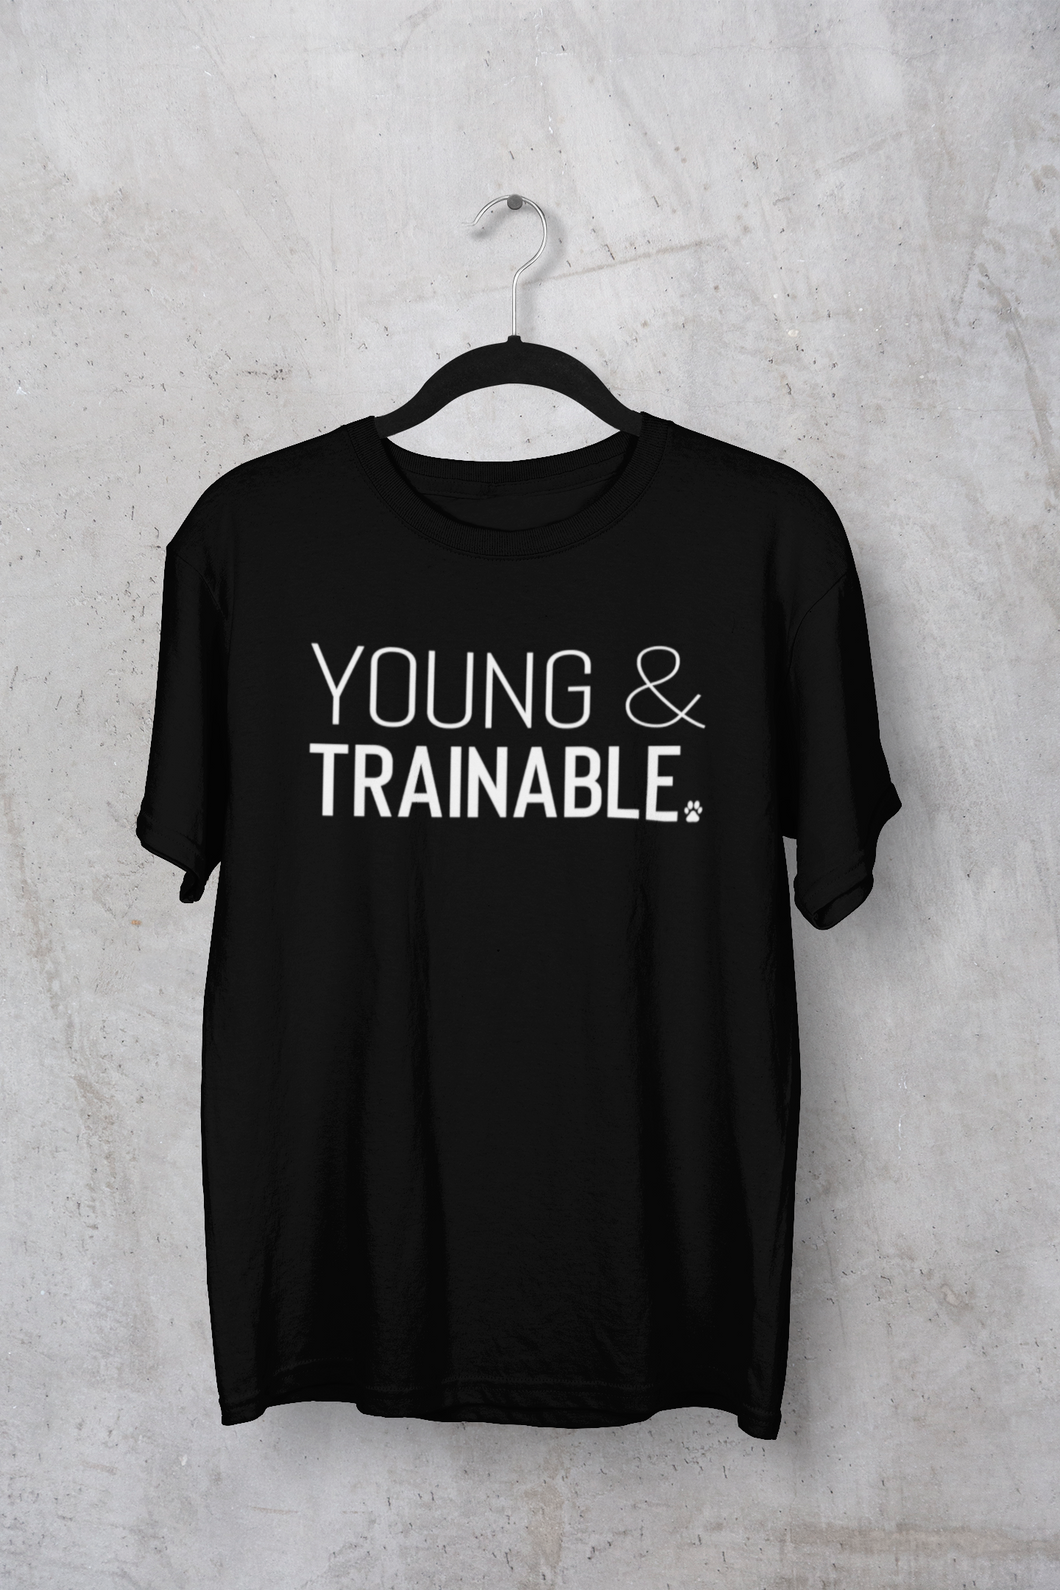 Young & Trainable Men's/Unisex or Women's T-shirt